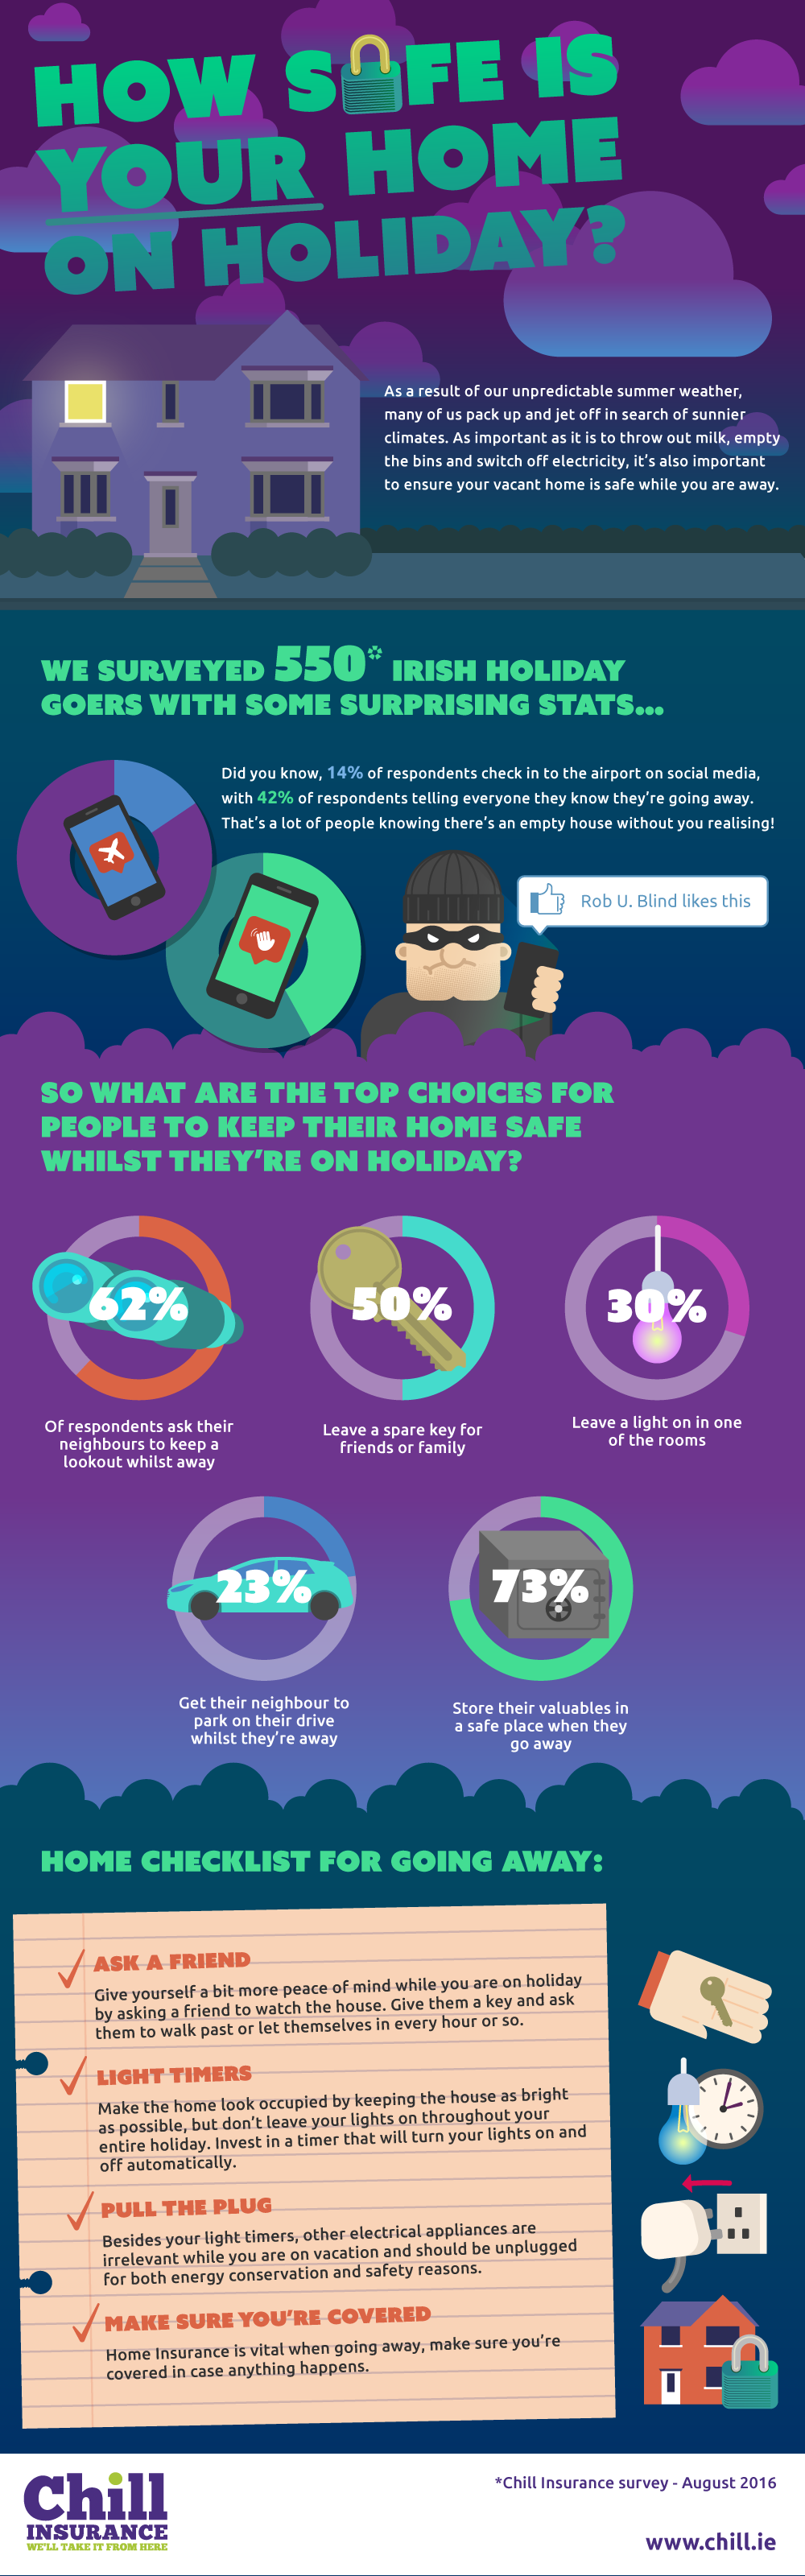 How-safe-is-your-home-on-holiday